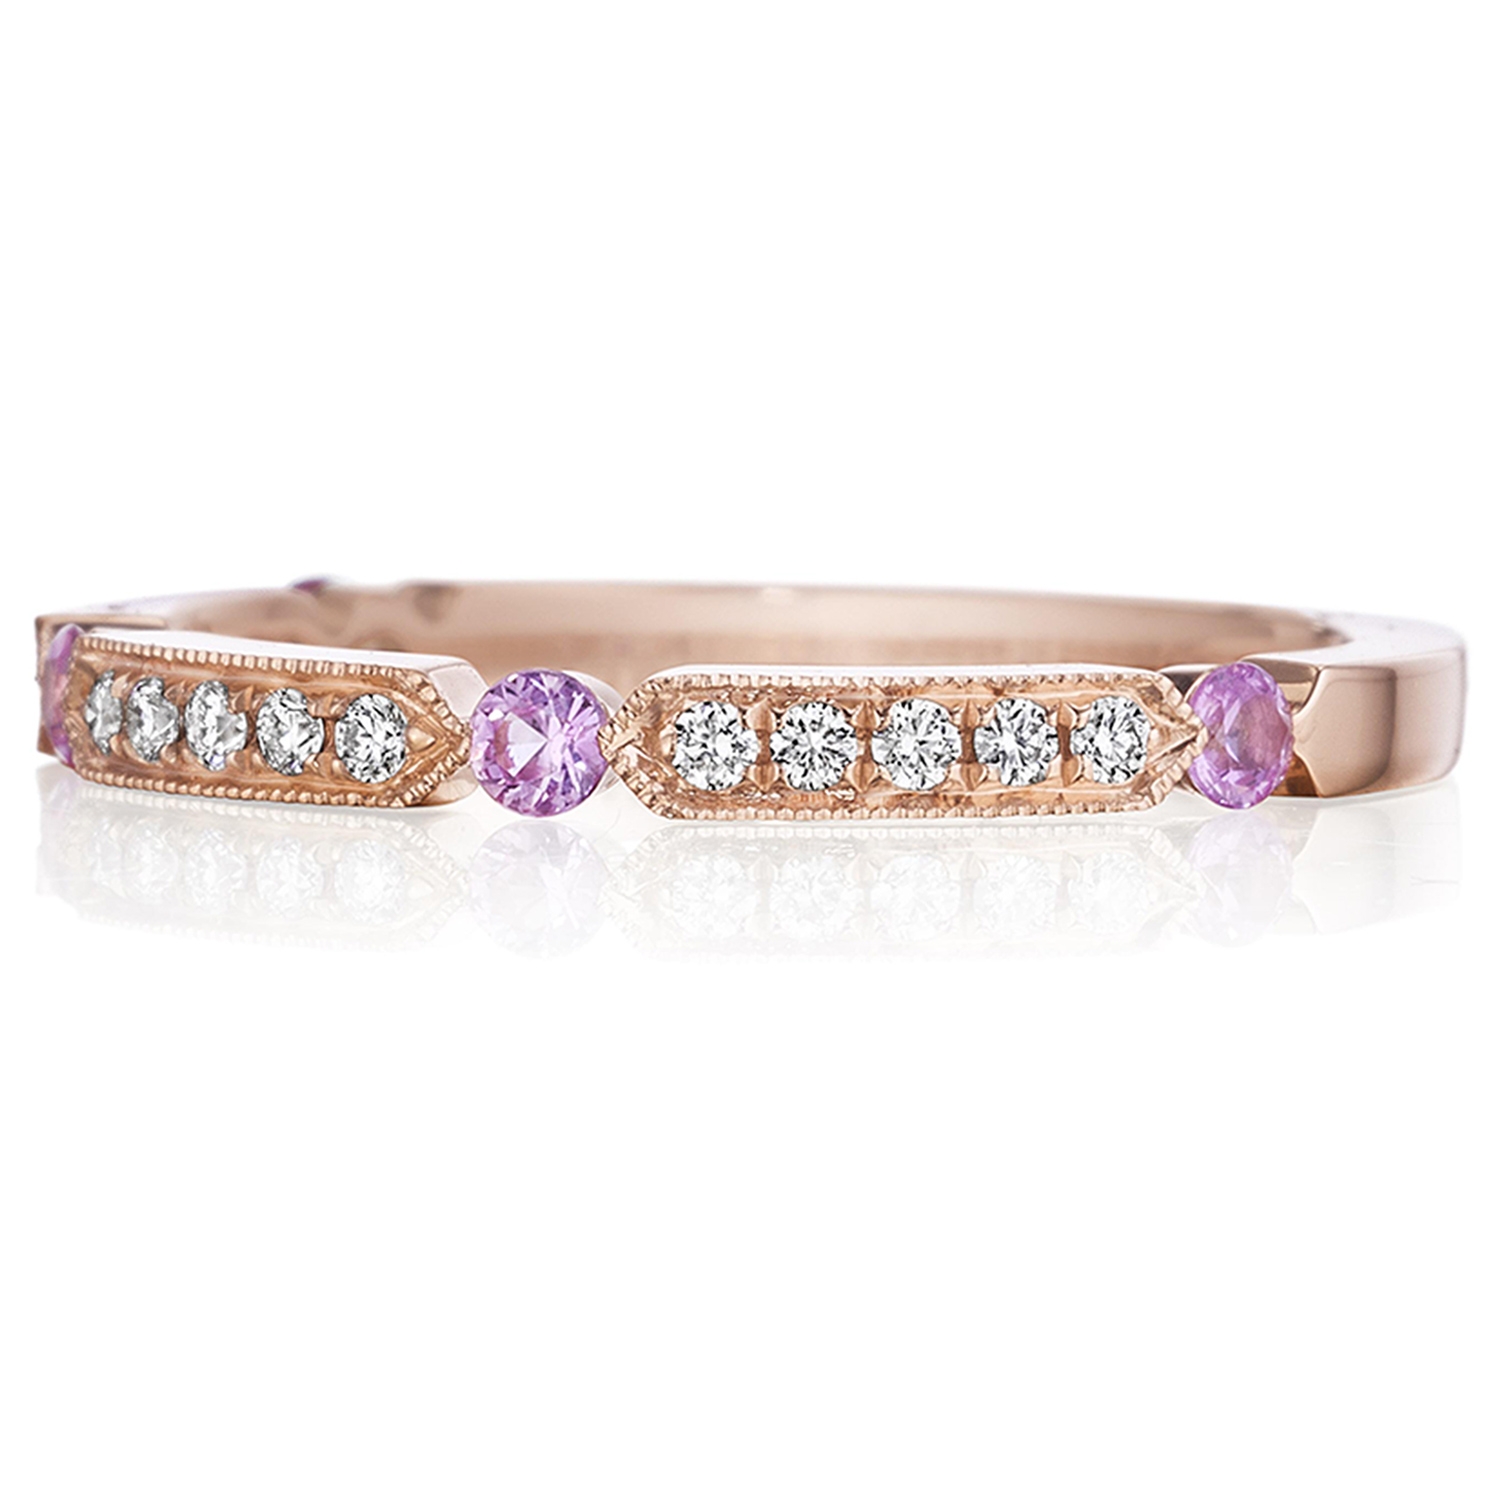 Henri Daussi R44-7 Rose Gold Bead Set Diamond and Pink Sapphire Band with Miligrain Detail